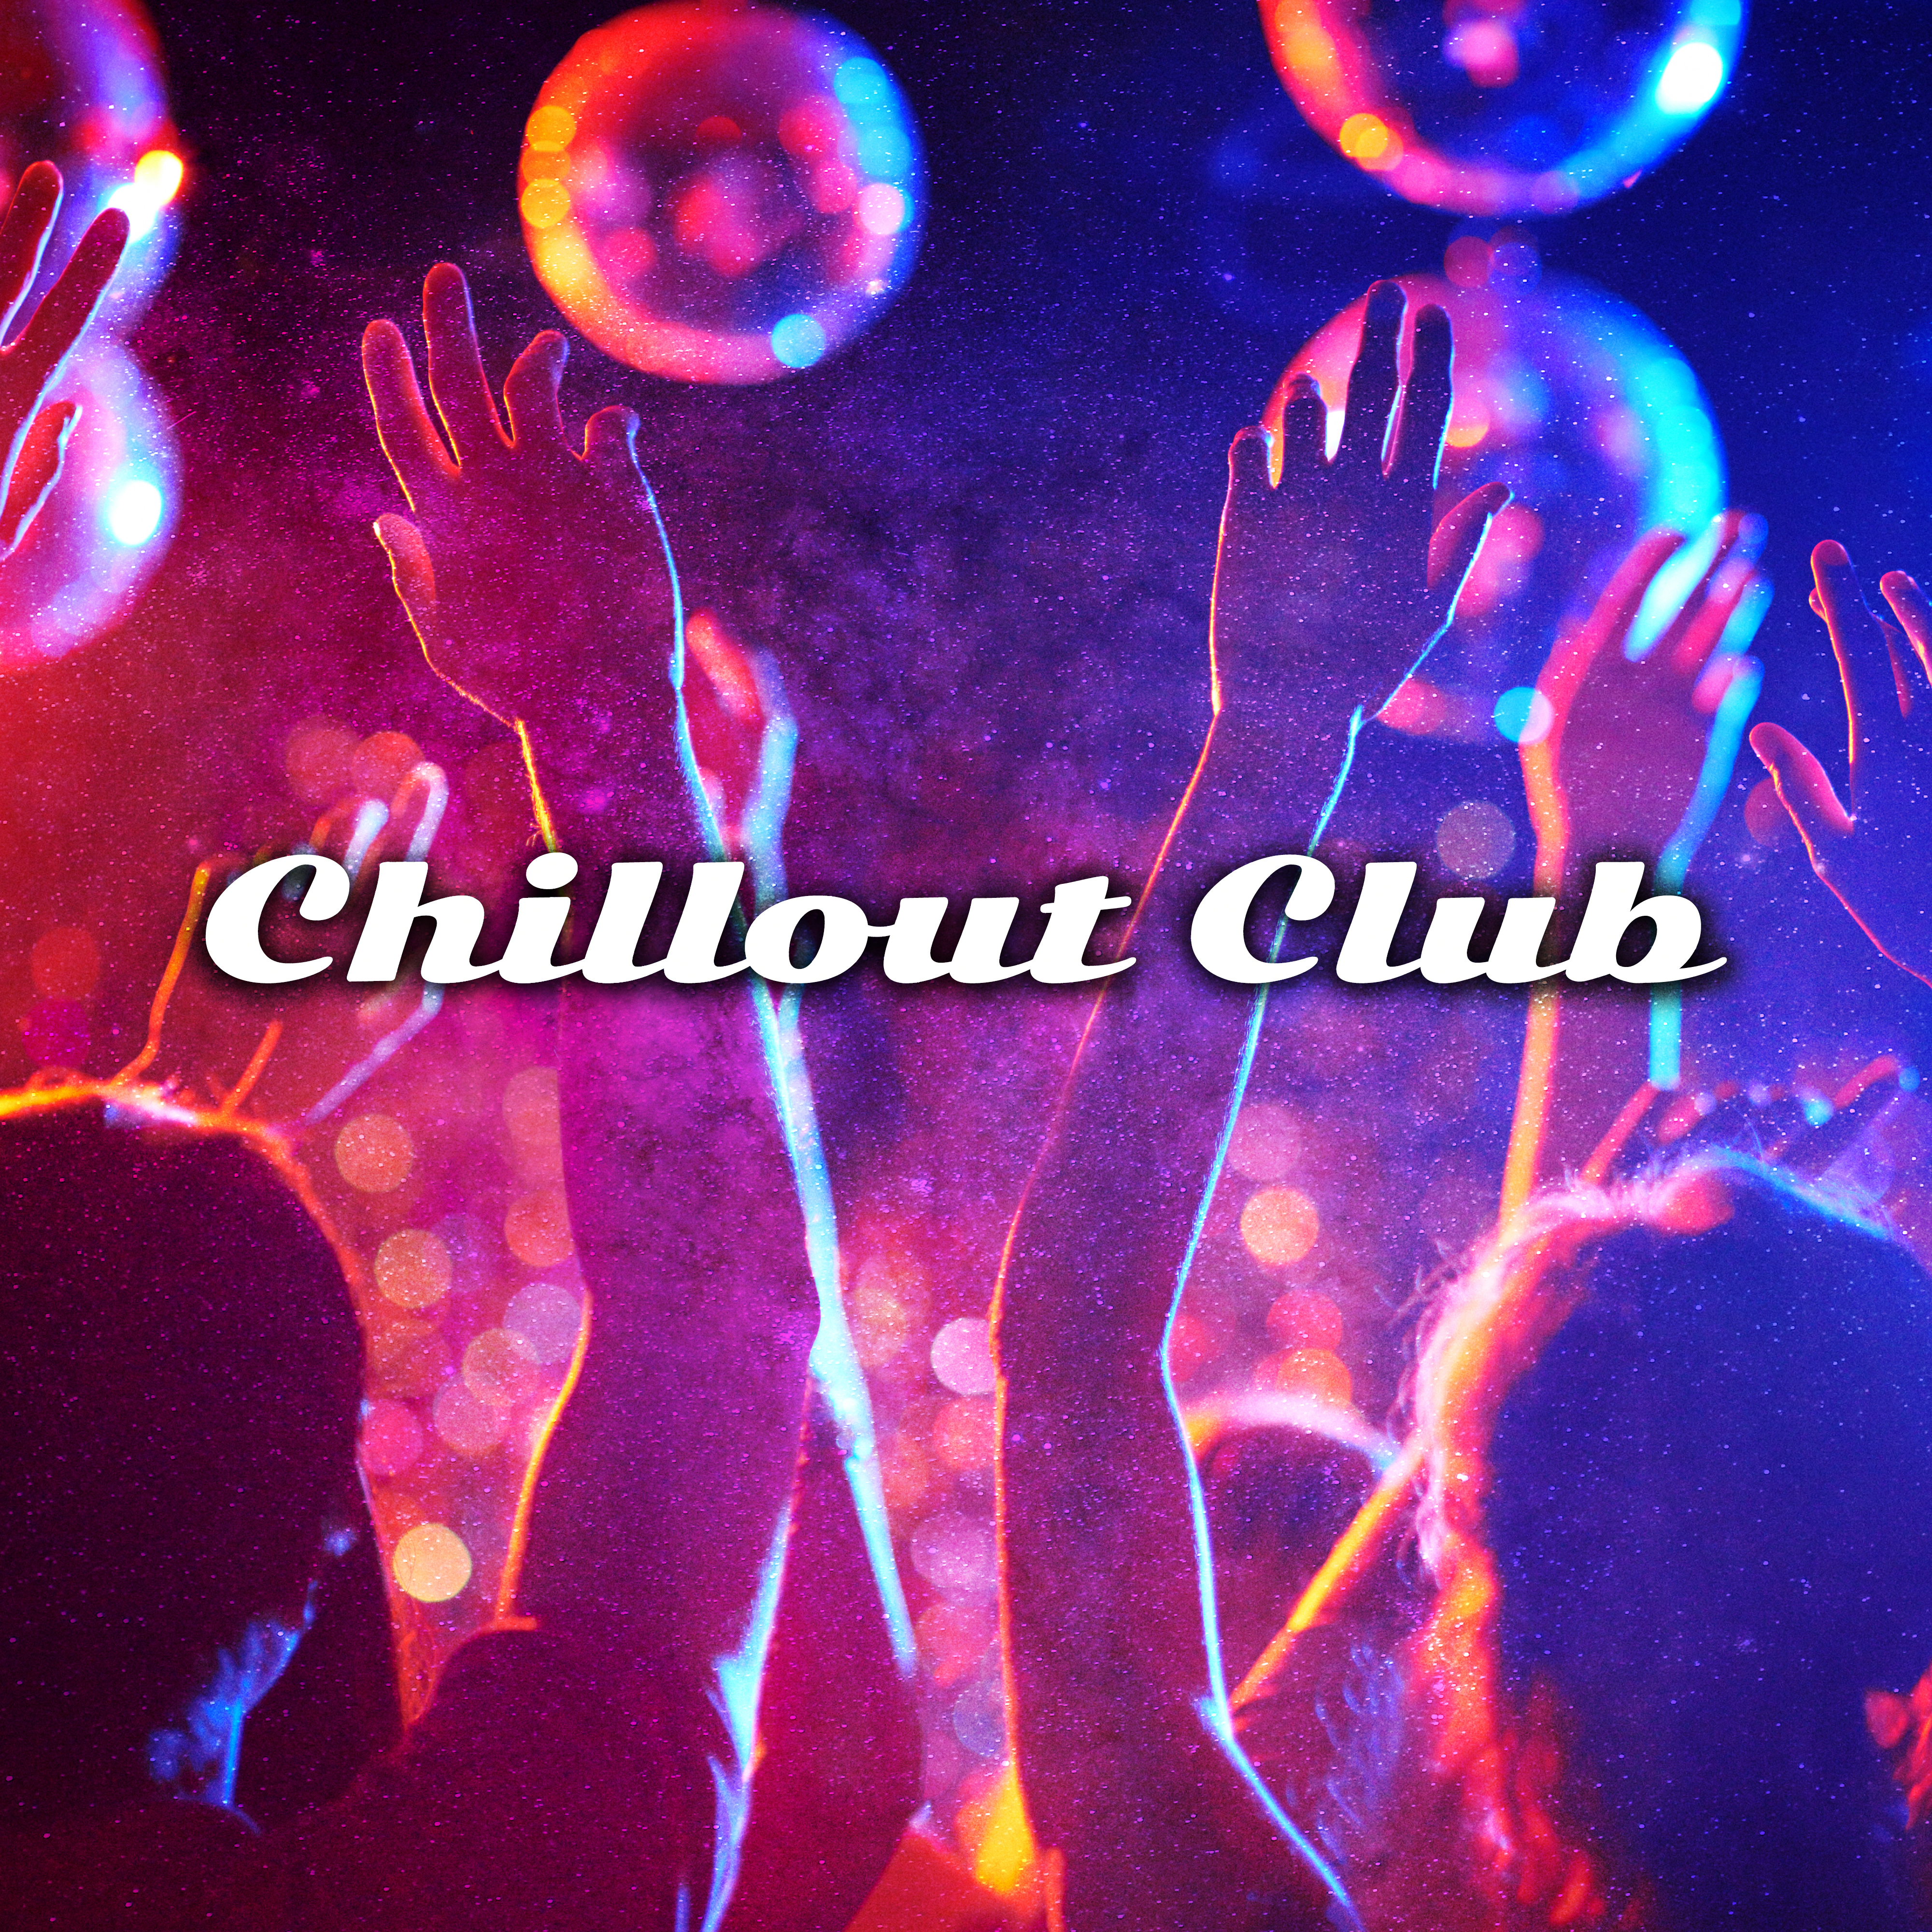 Chillout Club – Deep Relaxation, Chill Out 2017, Party Music, Top of Summer Music